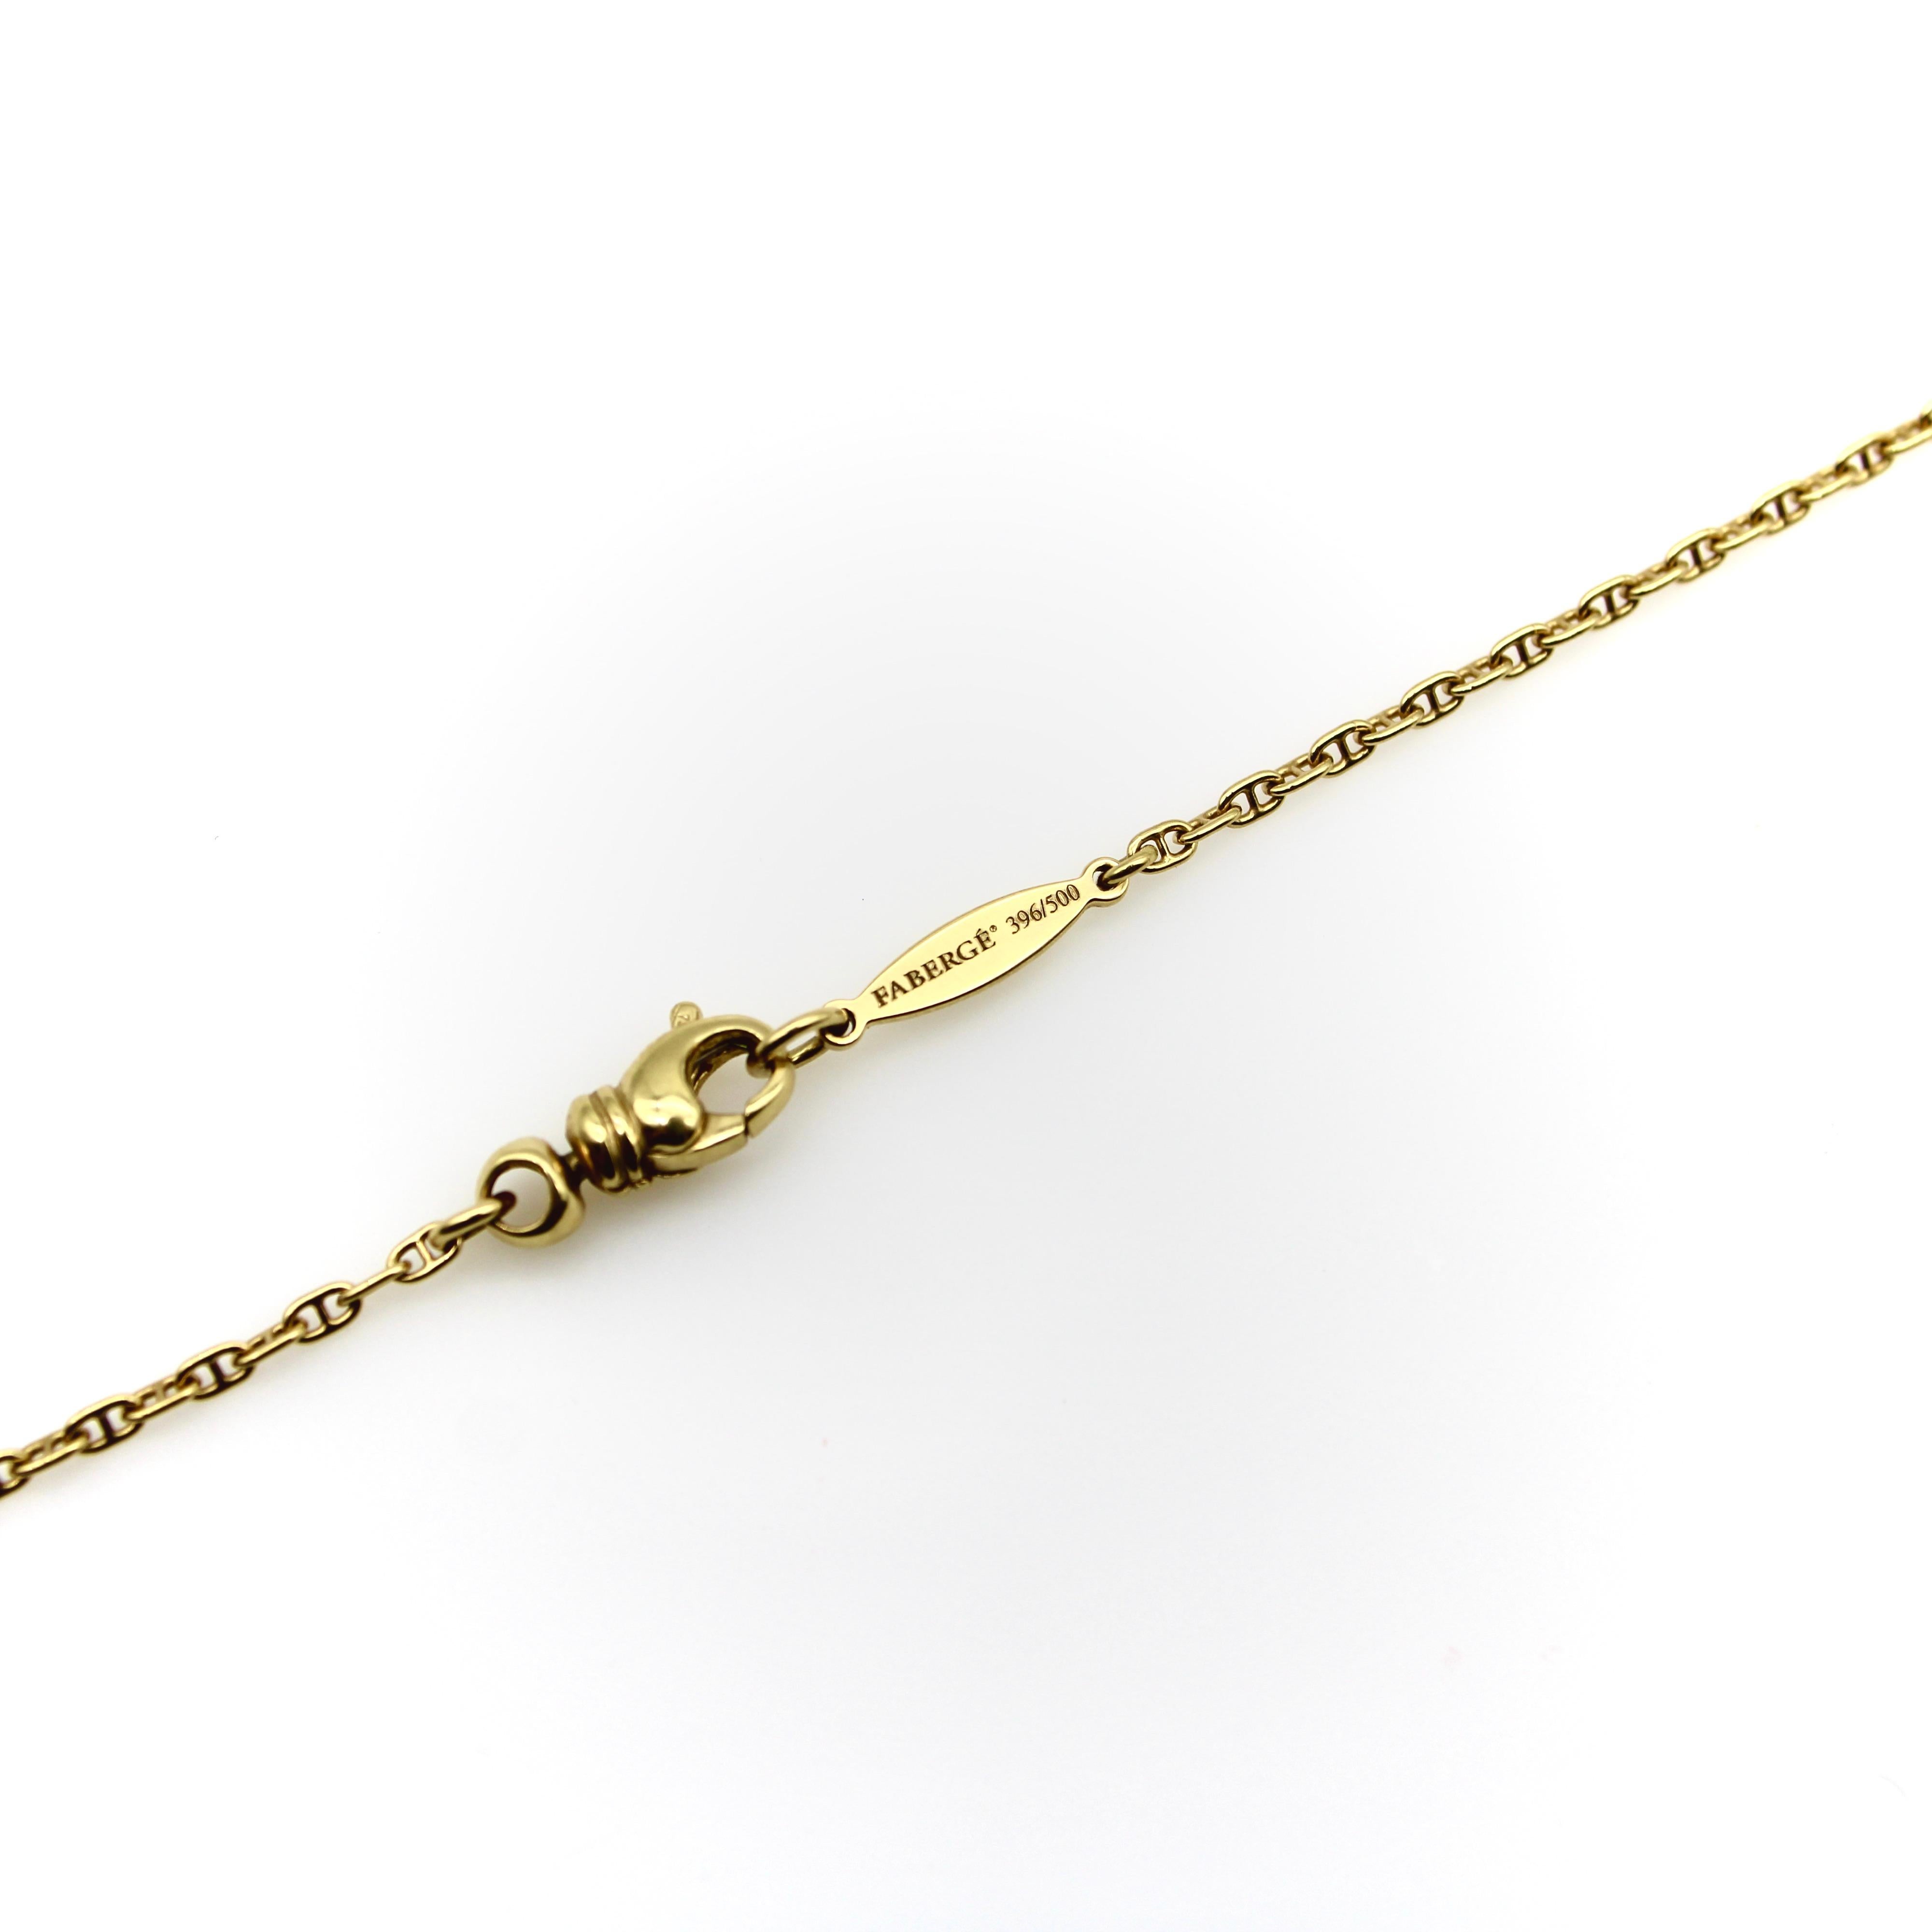 Fabergé 18K Gold Mariners Link Chain with Guilloché Enamel Stations  4